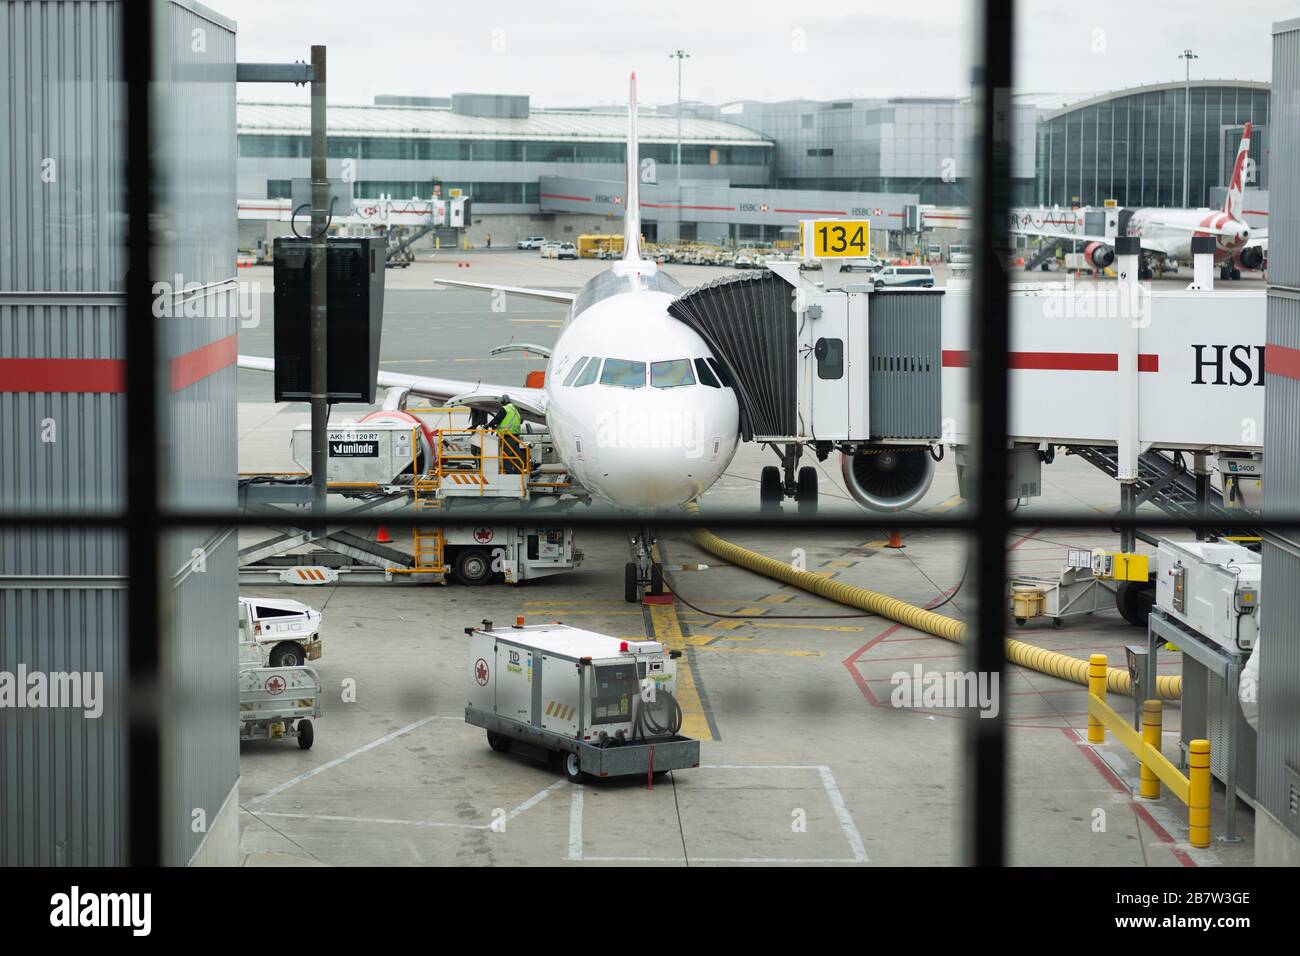 A colour landscape image showing a passenger jet at the gate at an airport. Stock Photo